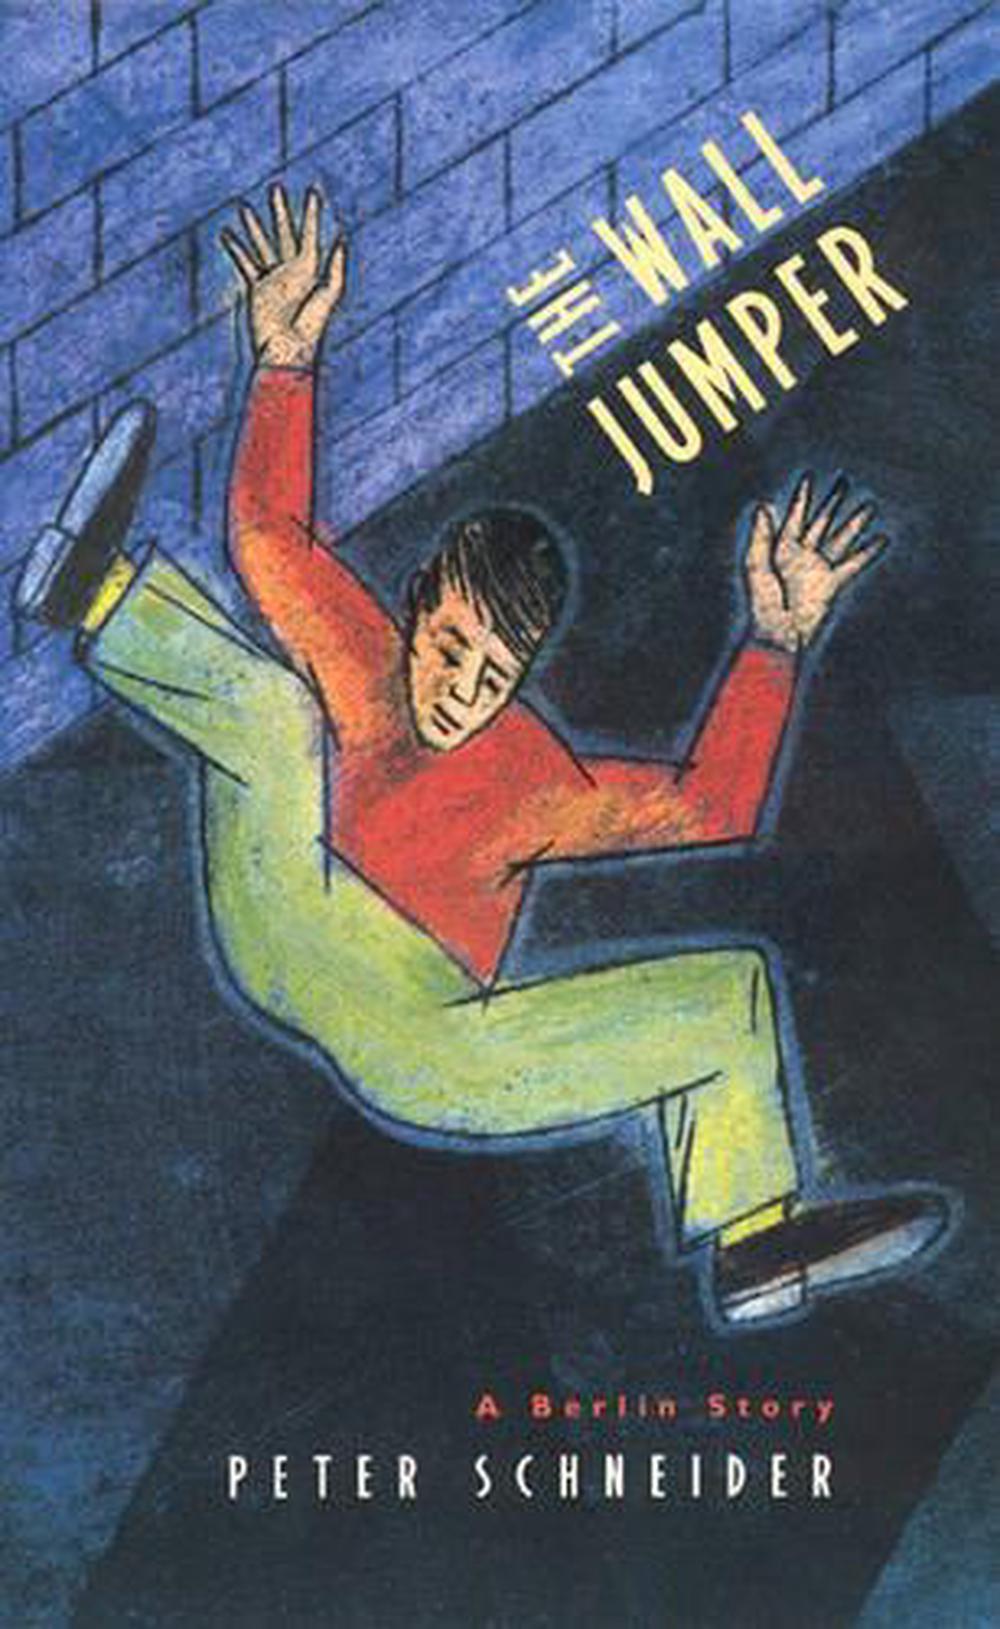 The Wall Jumper A Berlin Story by Peter Schneider (English) Paperback